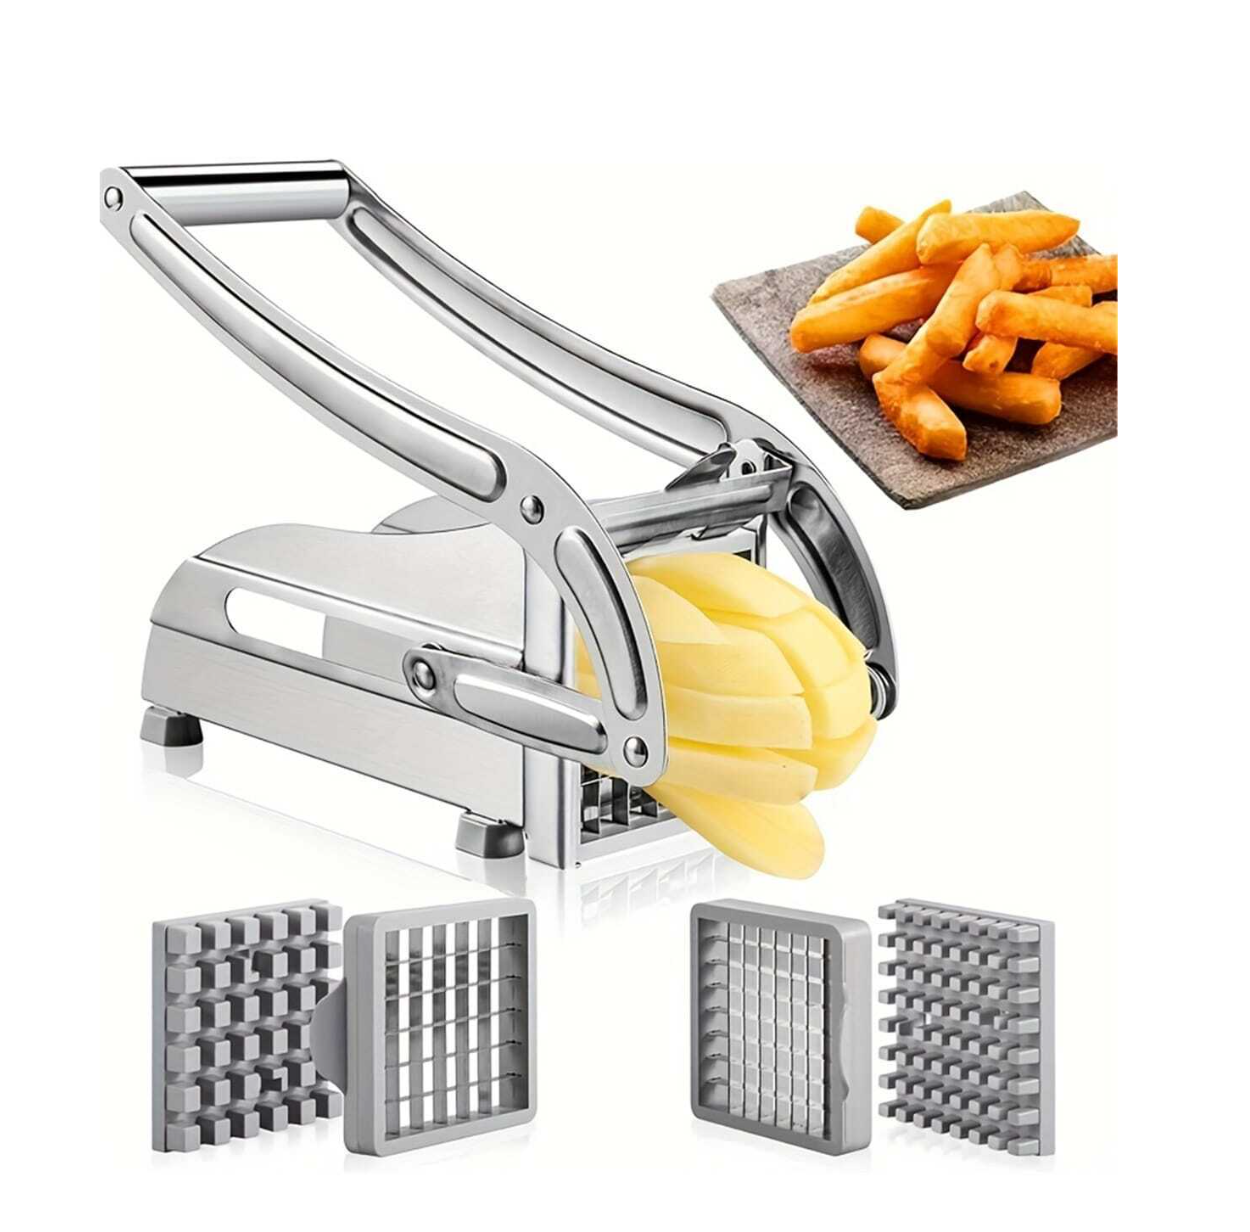 Slicing Mastery Unleashed: Manual Stainless Steel French Fries Cutter with Bonus Cucumber Slicer – Your Ultimate Kitchen Duo!